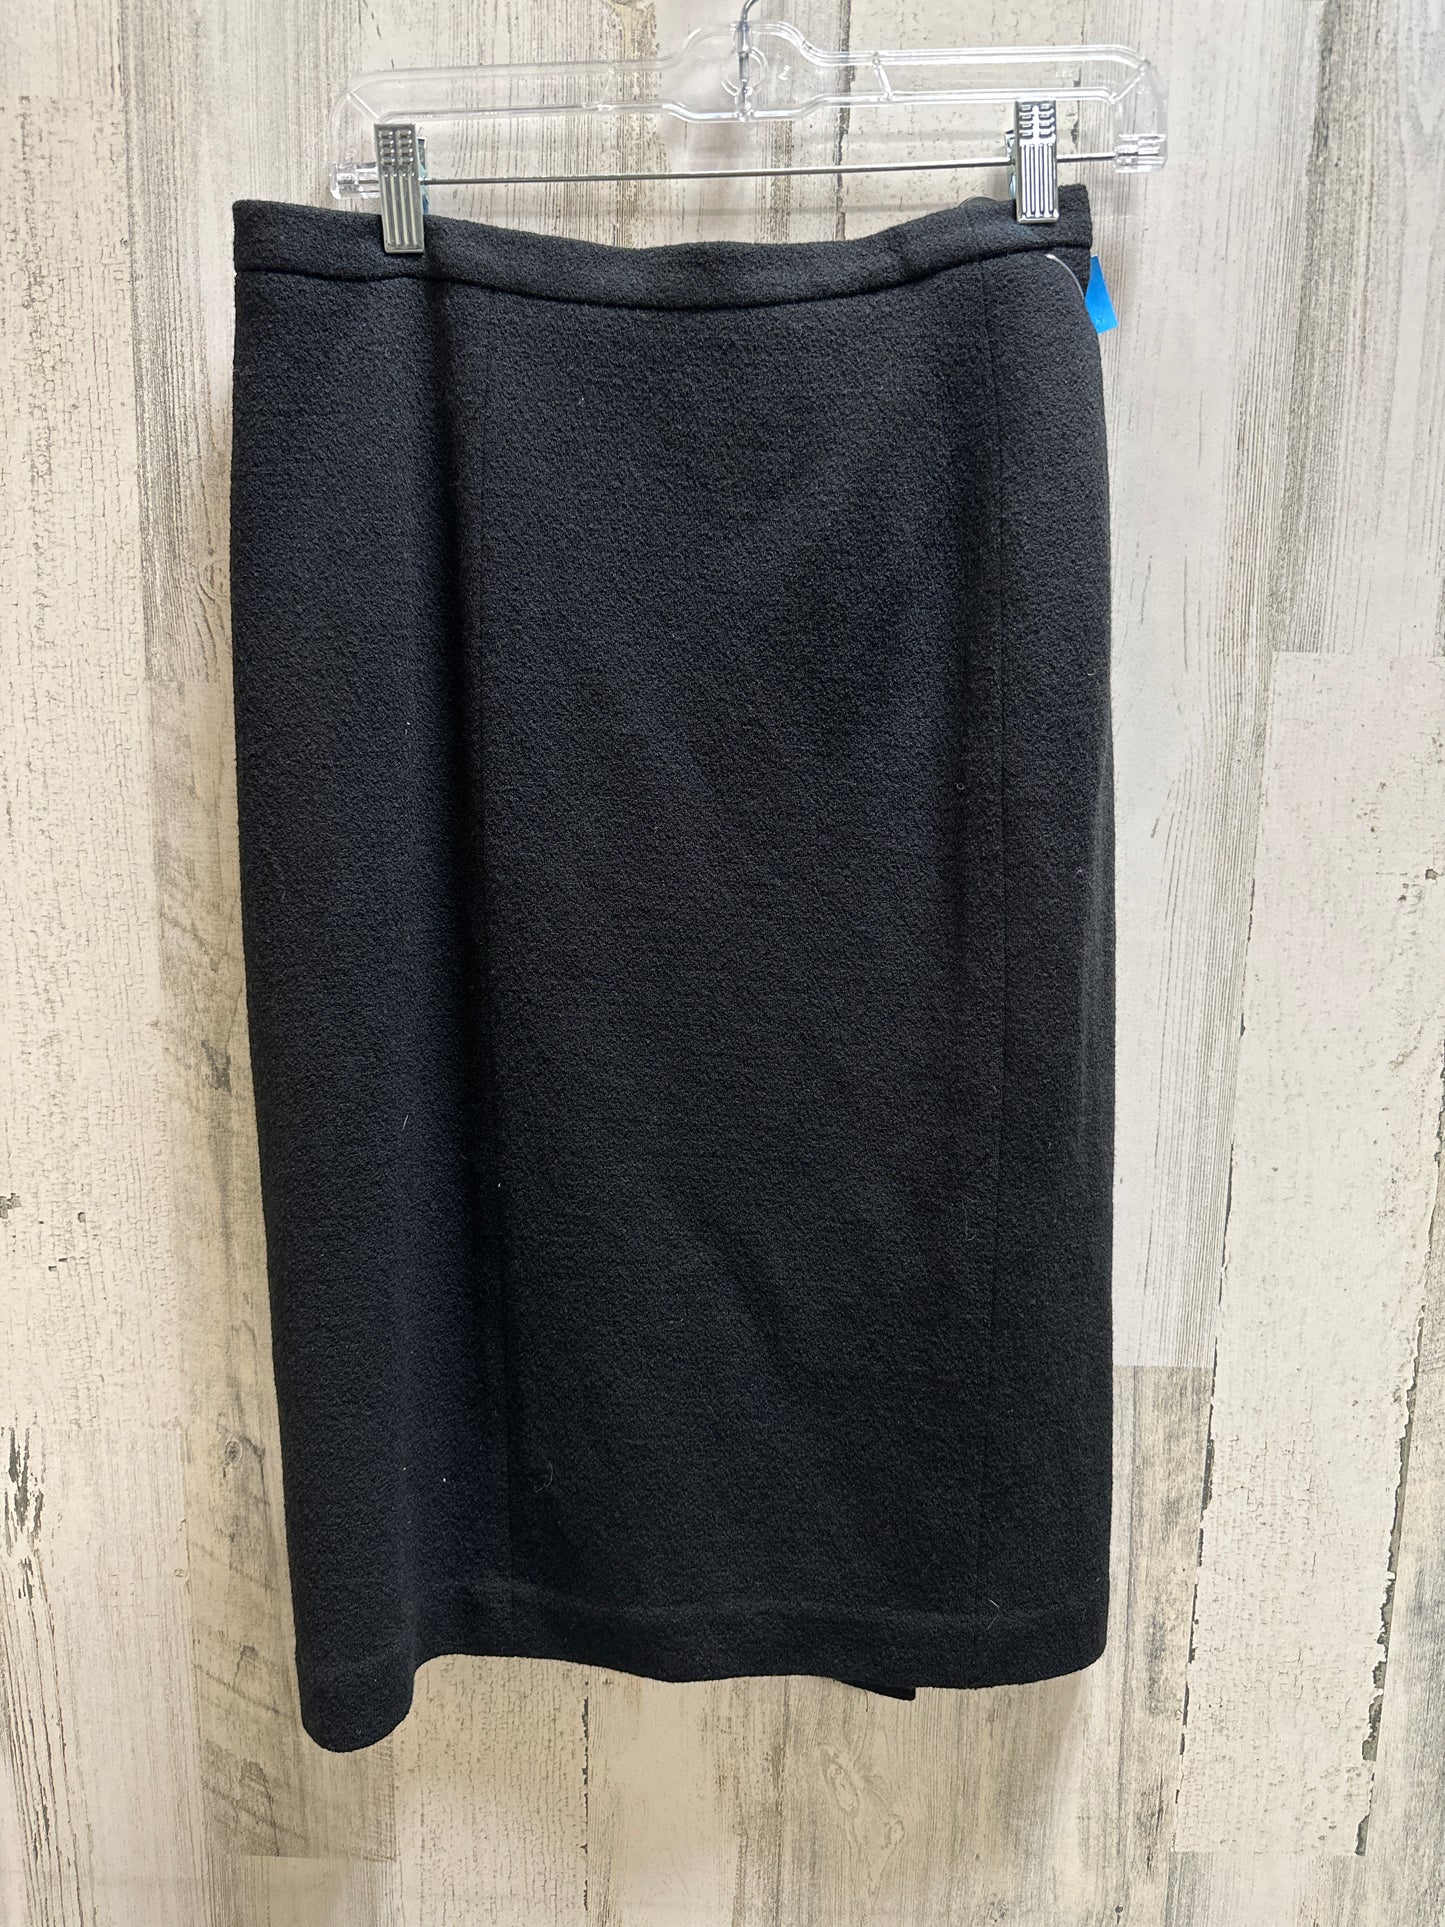 Skirt Maxi By Doncaster  Size: 6